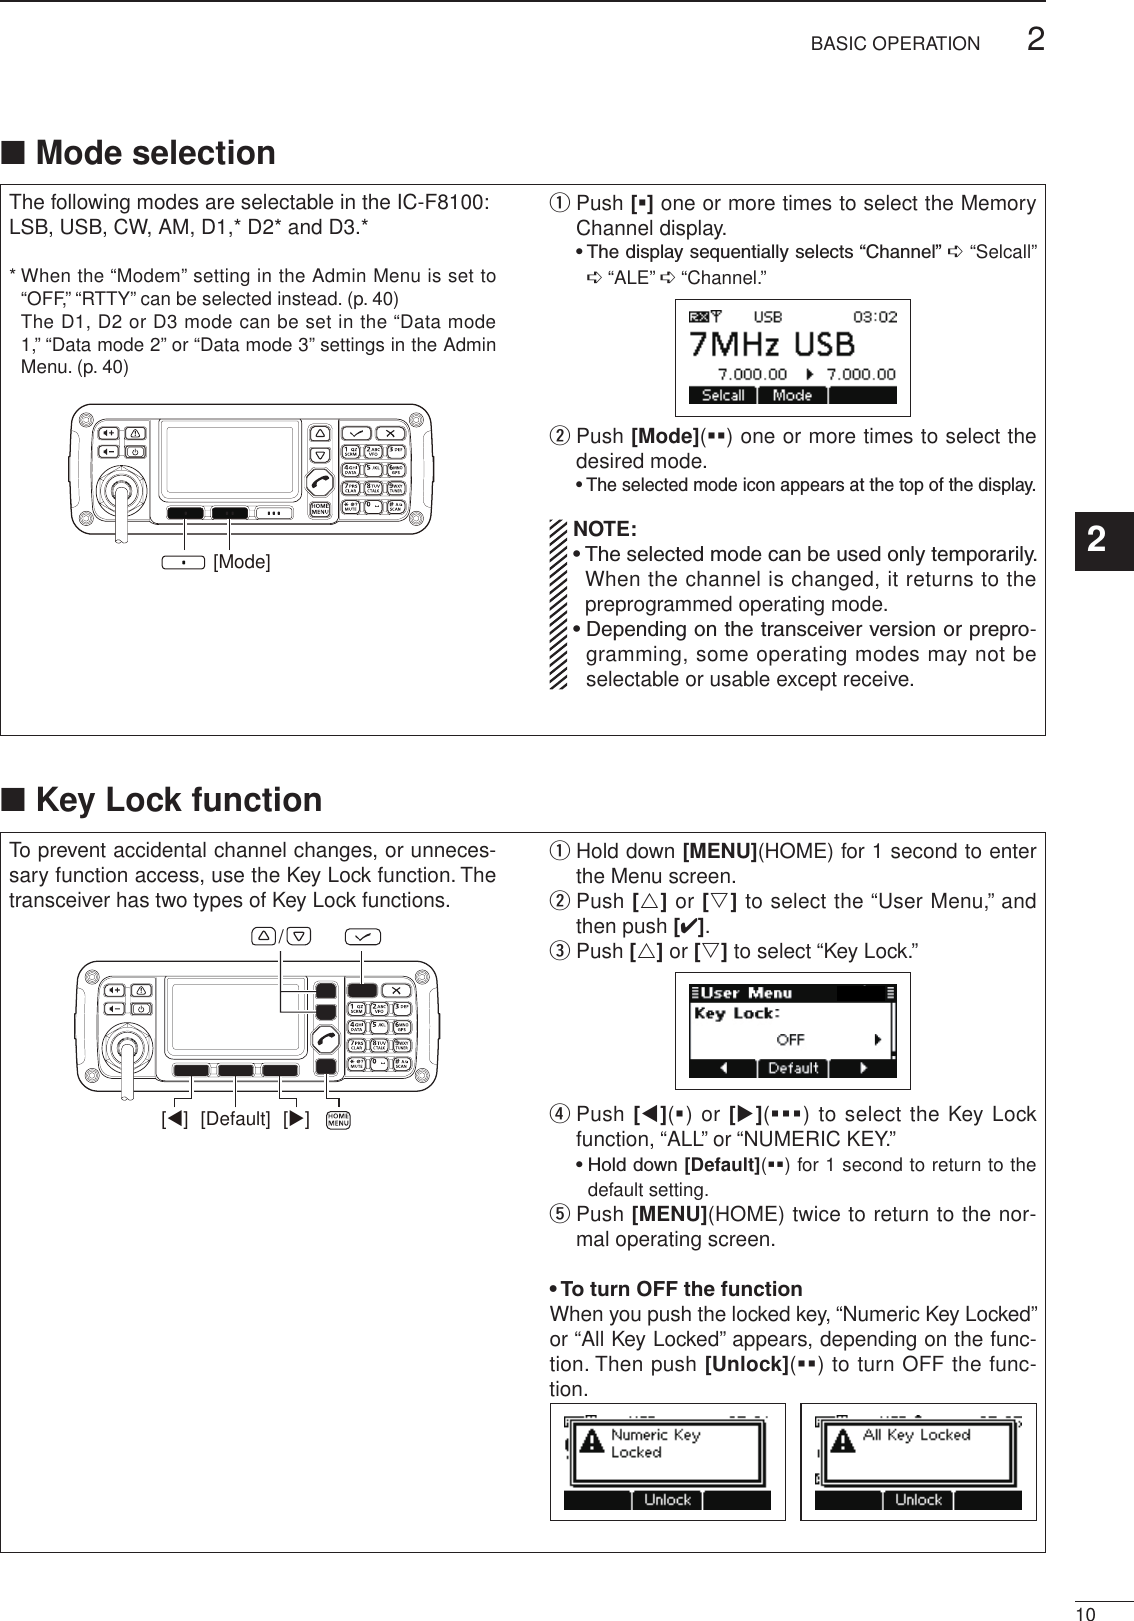 2001 NEW102BASIC OPERATION1234567891011121314151617Quick ReferenceThe following modes are selectable in the IC-F8100:LSB, USB, CW, AM, D1,* D2* and D3.**  When the “Modem” setting in the Admin Menu is set to “OFF,” “RTTY” can be selected instead. (p. 40)   The D1, D2 or D3 mode can be set in the “Data mode 1,” “Data mode 2” or “Data mode 3” settings in the Admin Menu. (p. 40)[Mode]q  Push [§] one or more times to select the Memory Channel display.  •  The display sequentially selects “Channel” ➪“Selcall” ➪“ALE” ➪“Channel.”w  Push [Mode](§§) one or more times to select the desired mode.  •  The selected mode icon appears at the top of the display.  NOTE: •  The selected mode can be used only temporarily. When the channel is changed, it returns to the preprogrammed operating mode. •  Depending on the transceiver version or prepro-gramming, some operating modes may not be selectable or usable except receive.To prevent accidental channel changes, or unneces-sary function access, use the Key Lock function. The transceiver has two types of Key Lock functions.[Default] [][]/q  Hold down [MENU](HOME) for 1 second to enter the Menu screen.w  Push [r] or [s] to select the “User Menu,” and then push [4].e Push [r] or [s] to select “Key Lock.”r  Push [t](§) or [u](§§§) to select the Key Lock function, “ALL” or “NUMERIC KEY.”  •  Hold down [Default](§§) for 1 second to return to the default setting.t  Push [MENU](HOME) twice to return to the nor-mal operating screen.• To turn OFF the functionWhen you push the locked key, “Numeric Key Locked” or “All Key Locked” appears, depending on the func-tion. Then push [Unlock](§§) to turn OFF the func-tion.■ Mode selection■ Key Lock function